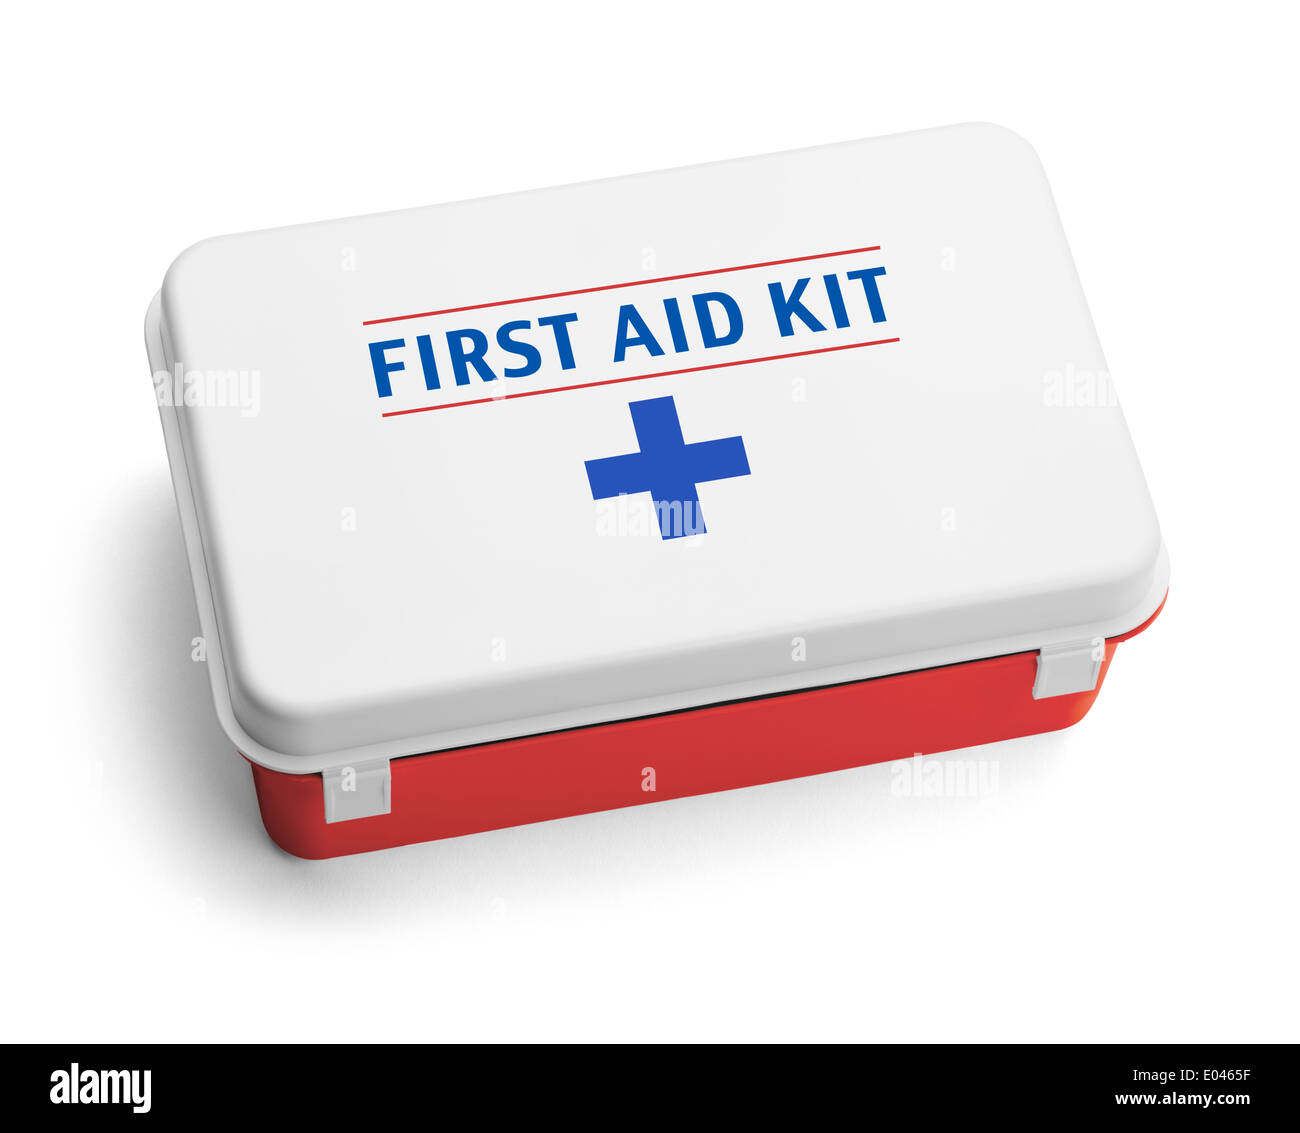 Plastic First Aid Kit Box thats Red, White and Blue. Isolated on White Background. Stock Photo